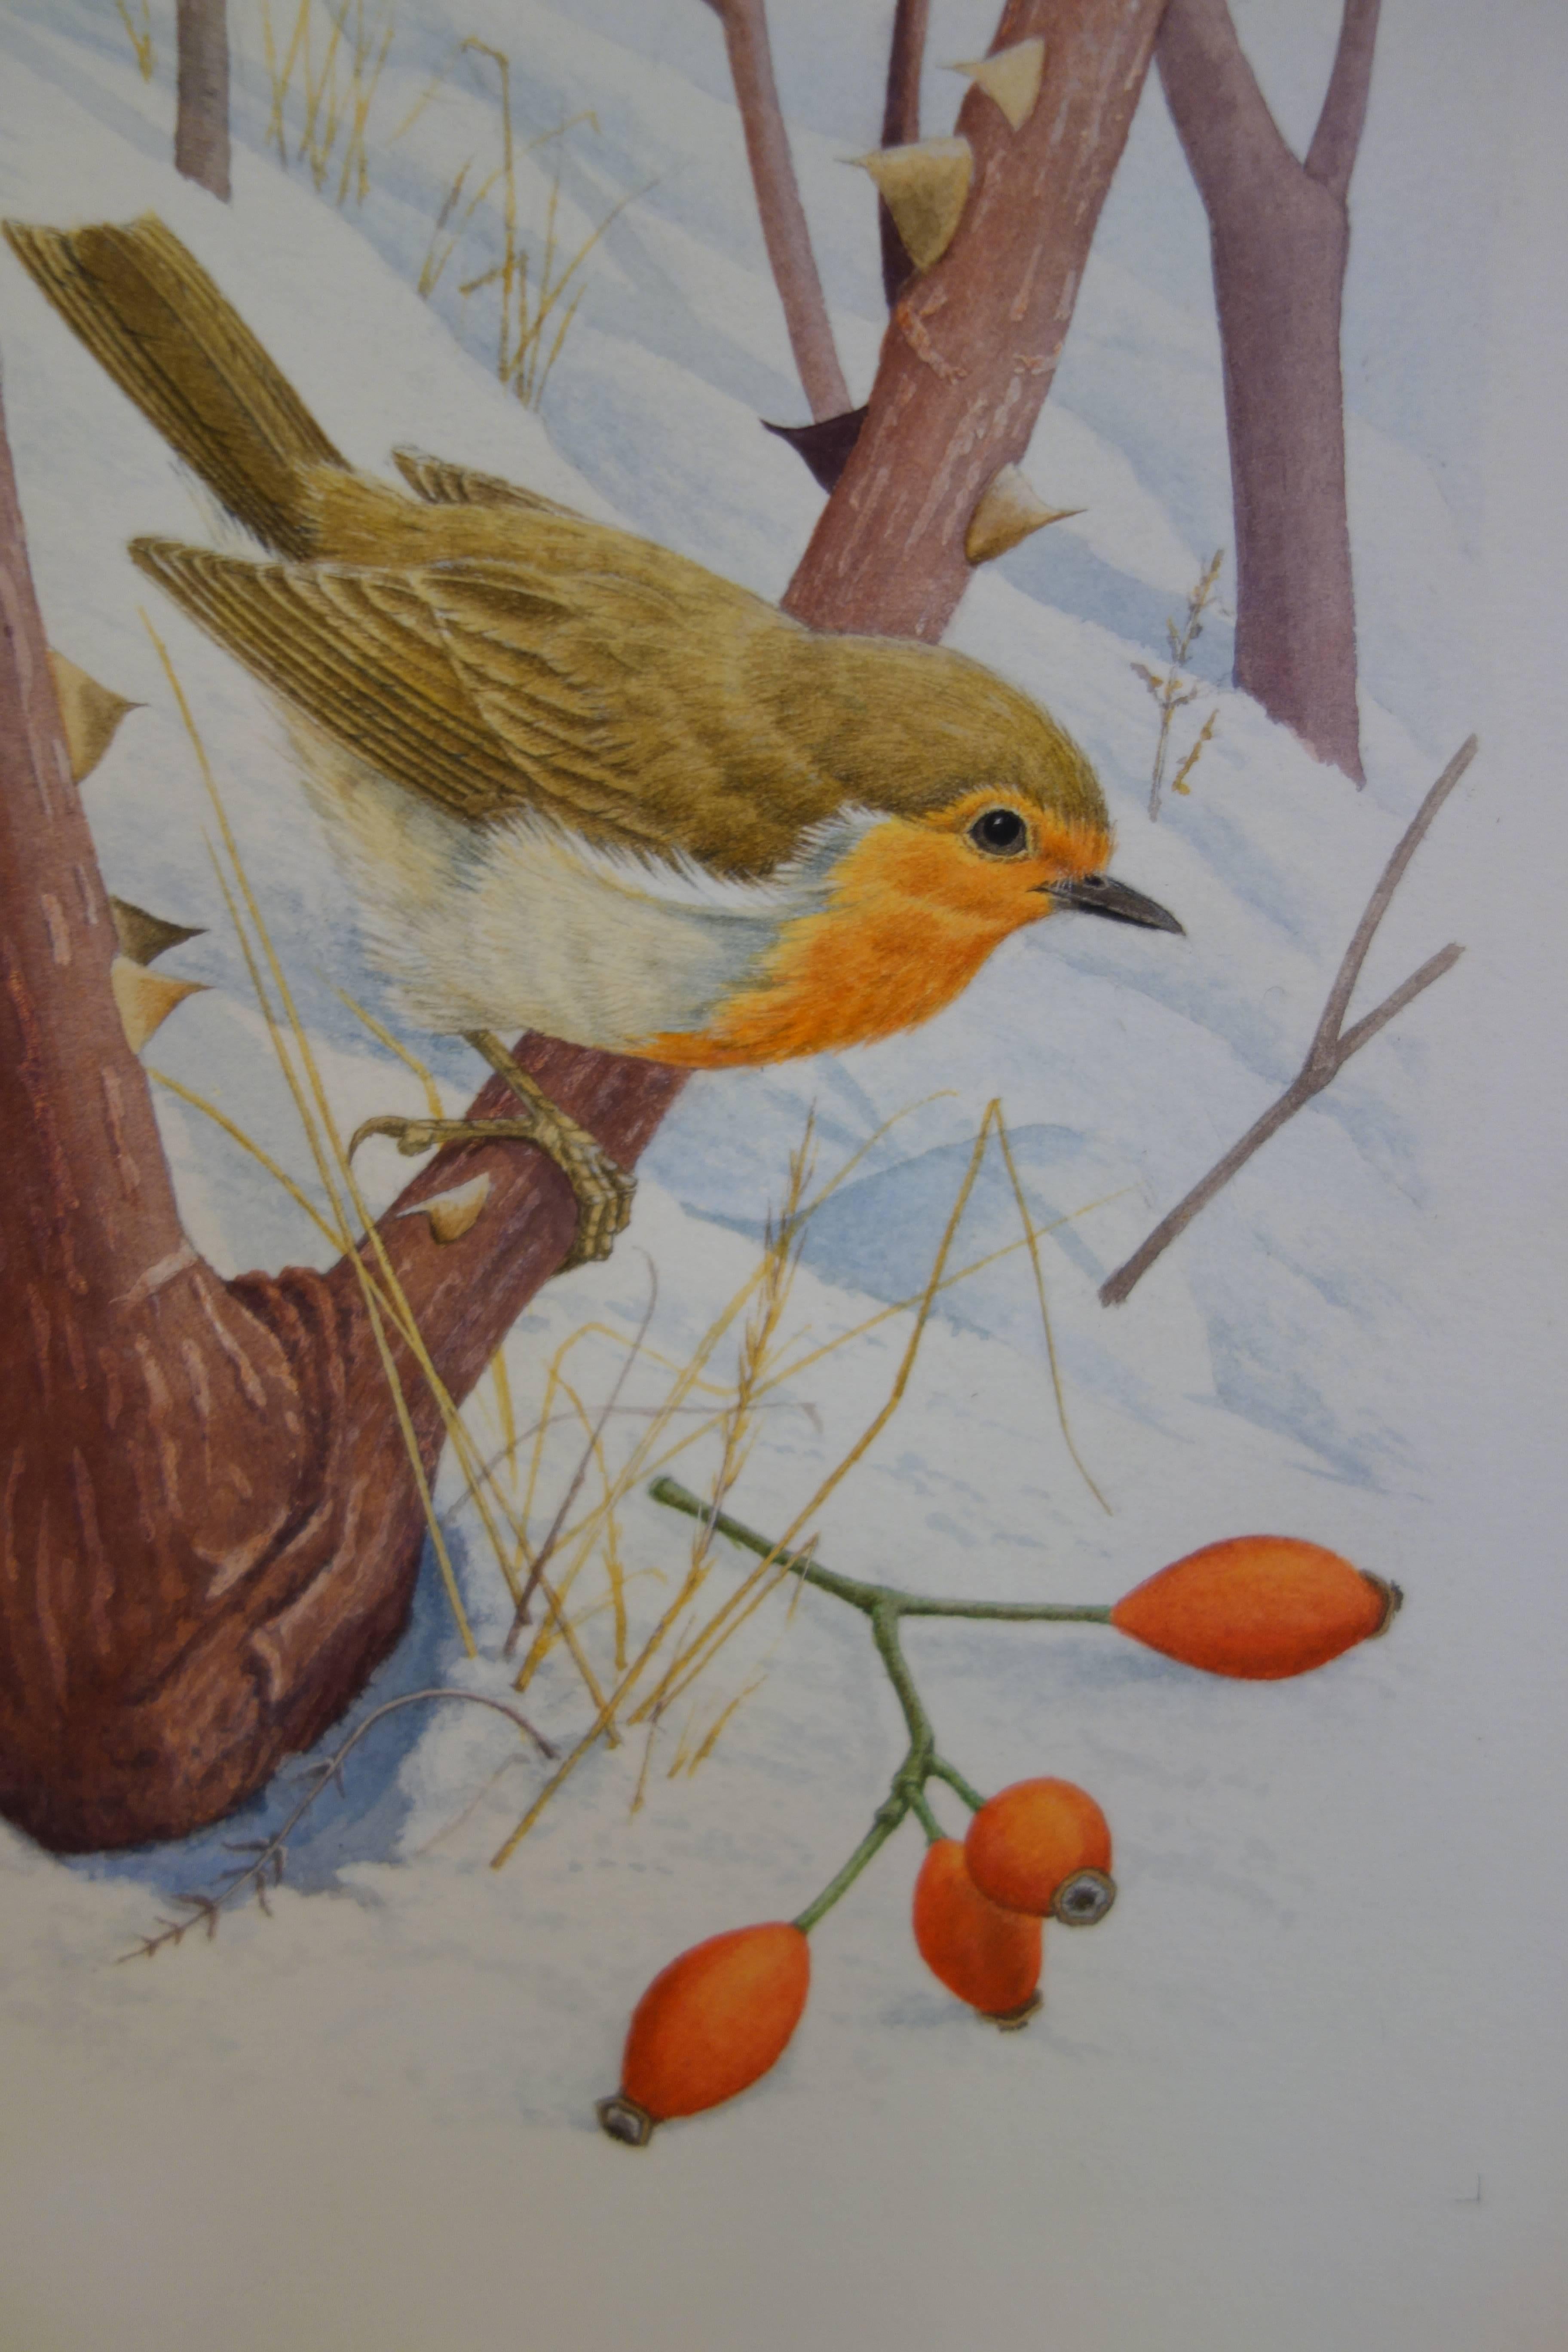 Study of a Robin in a Winter setting, with snow and a sprig of Holly berries - Art by Ron Jobson